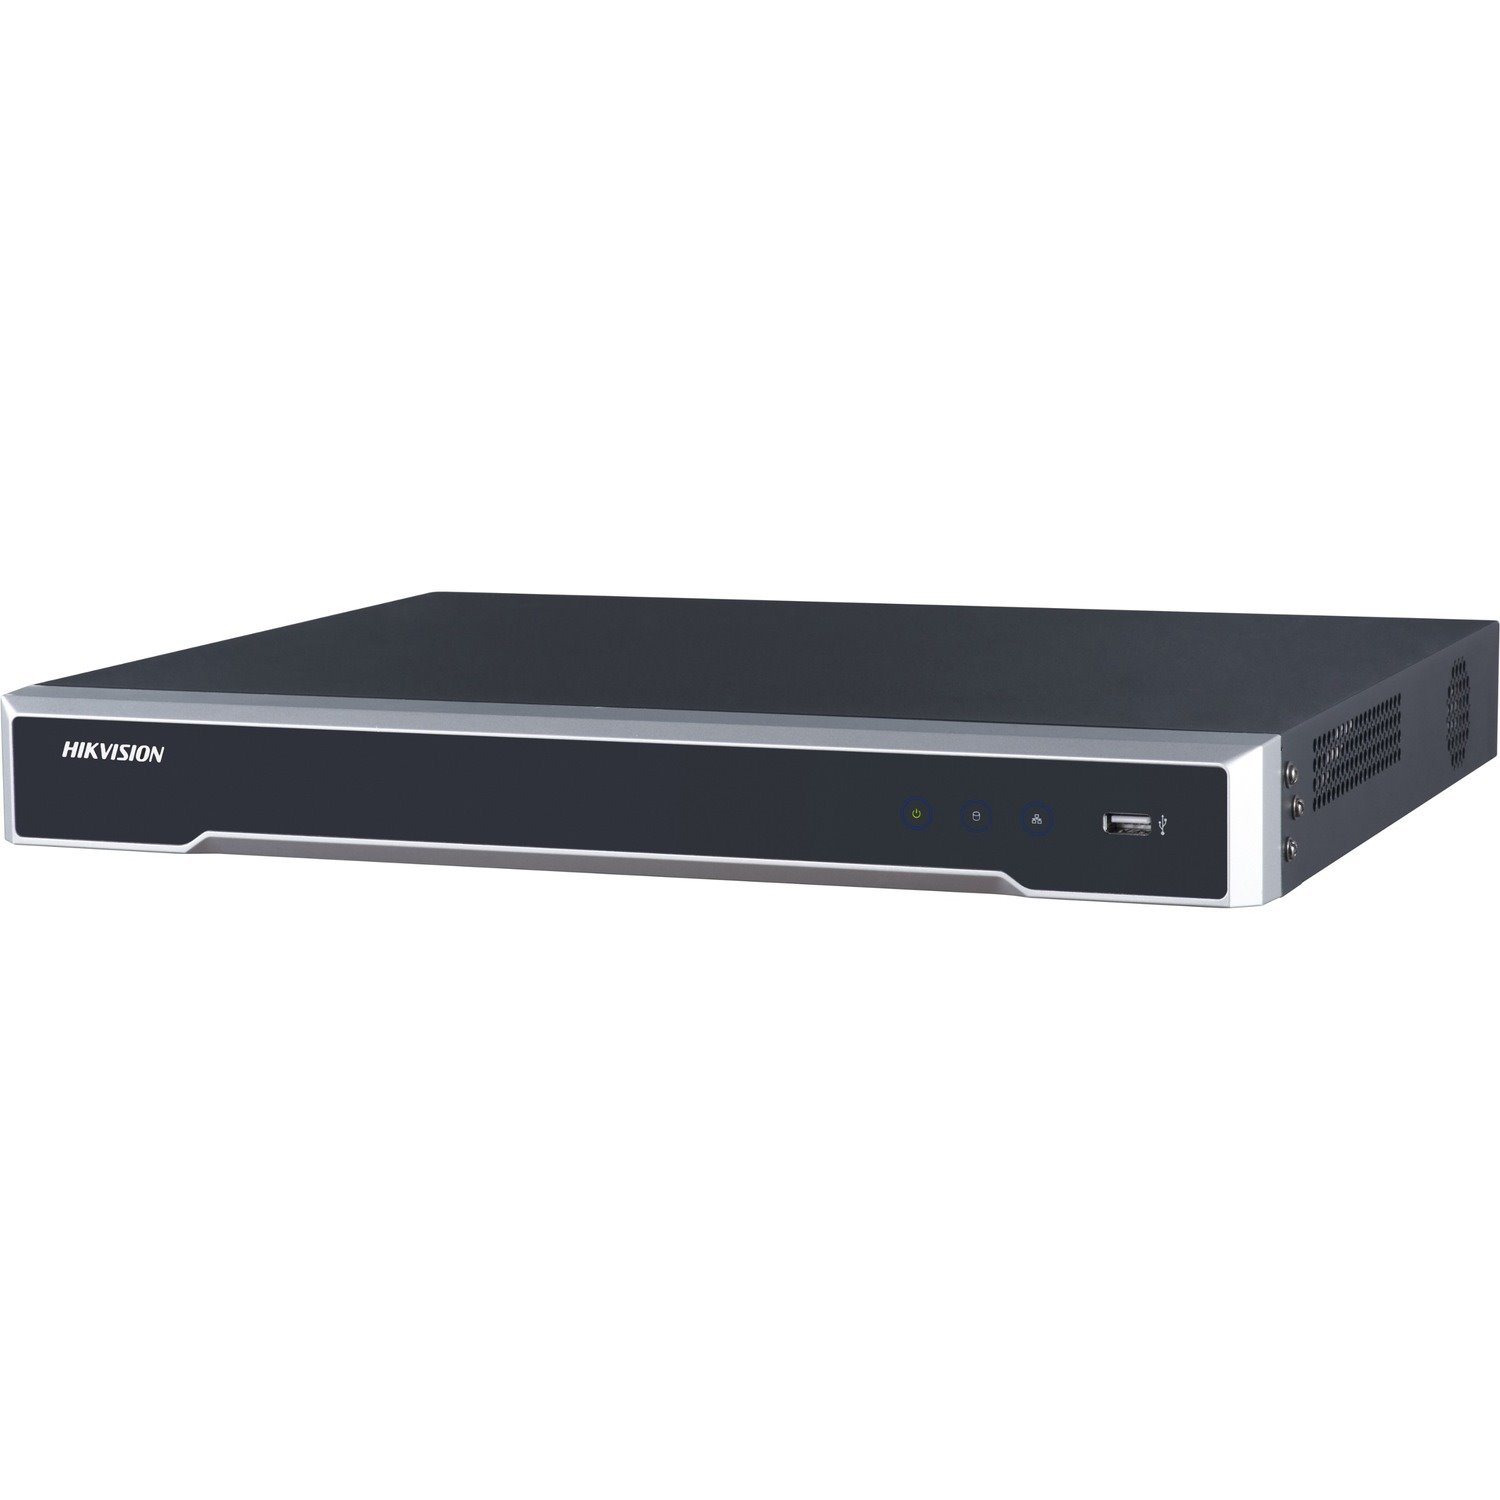 Hikvision 4K Plug and Play Network Video Recorder with PoE - 2 TB HDD